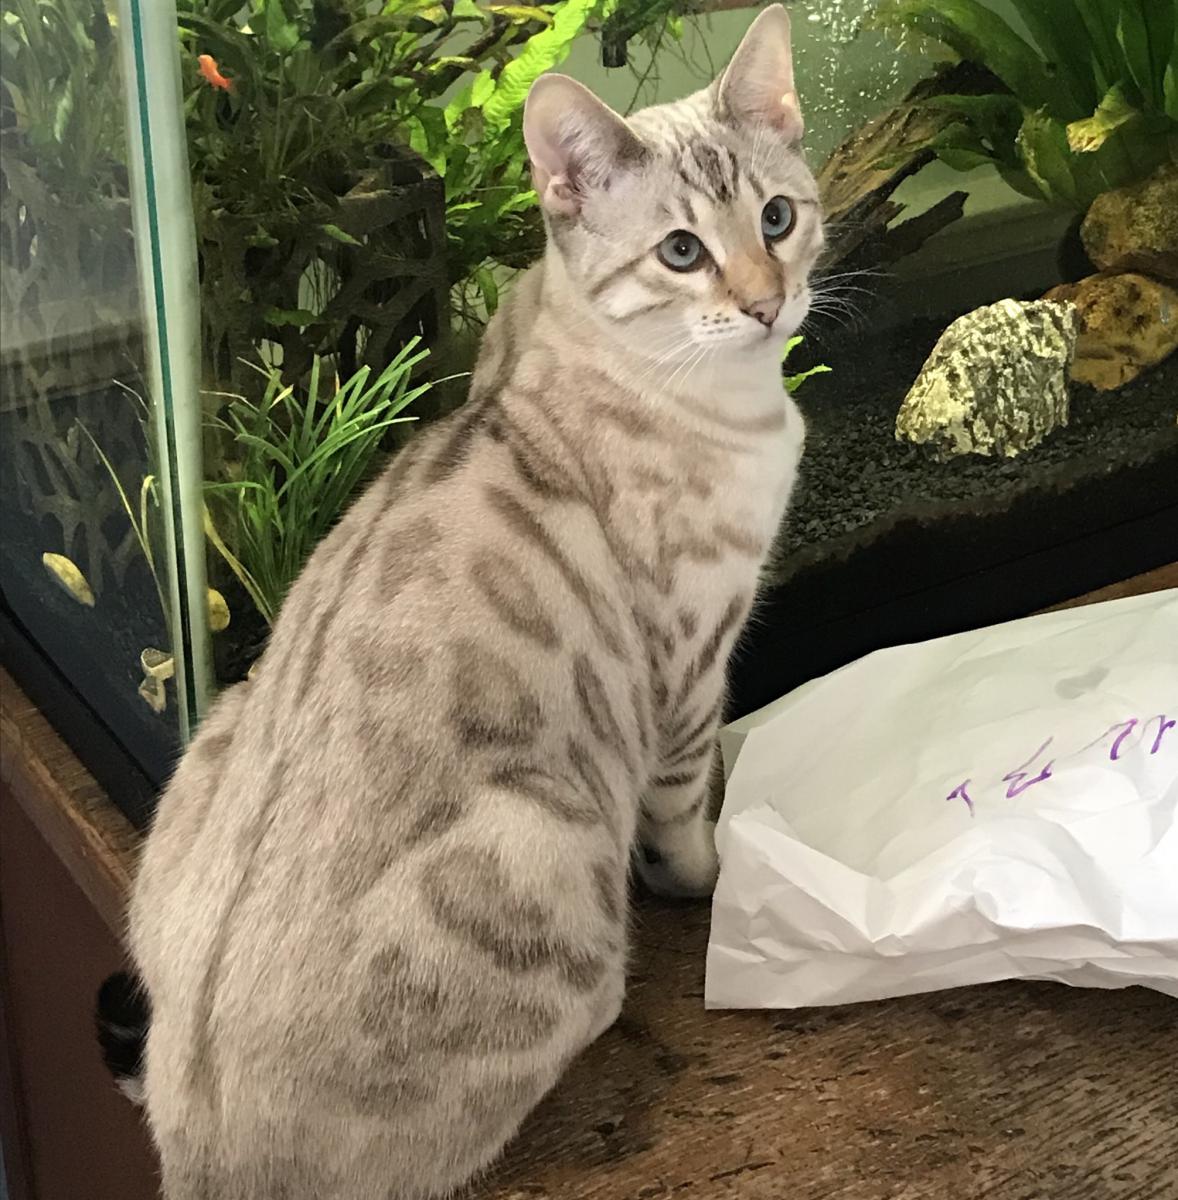 Image of Clyde, Lost Cat